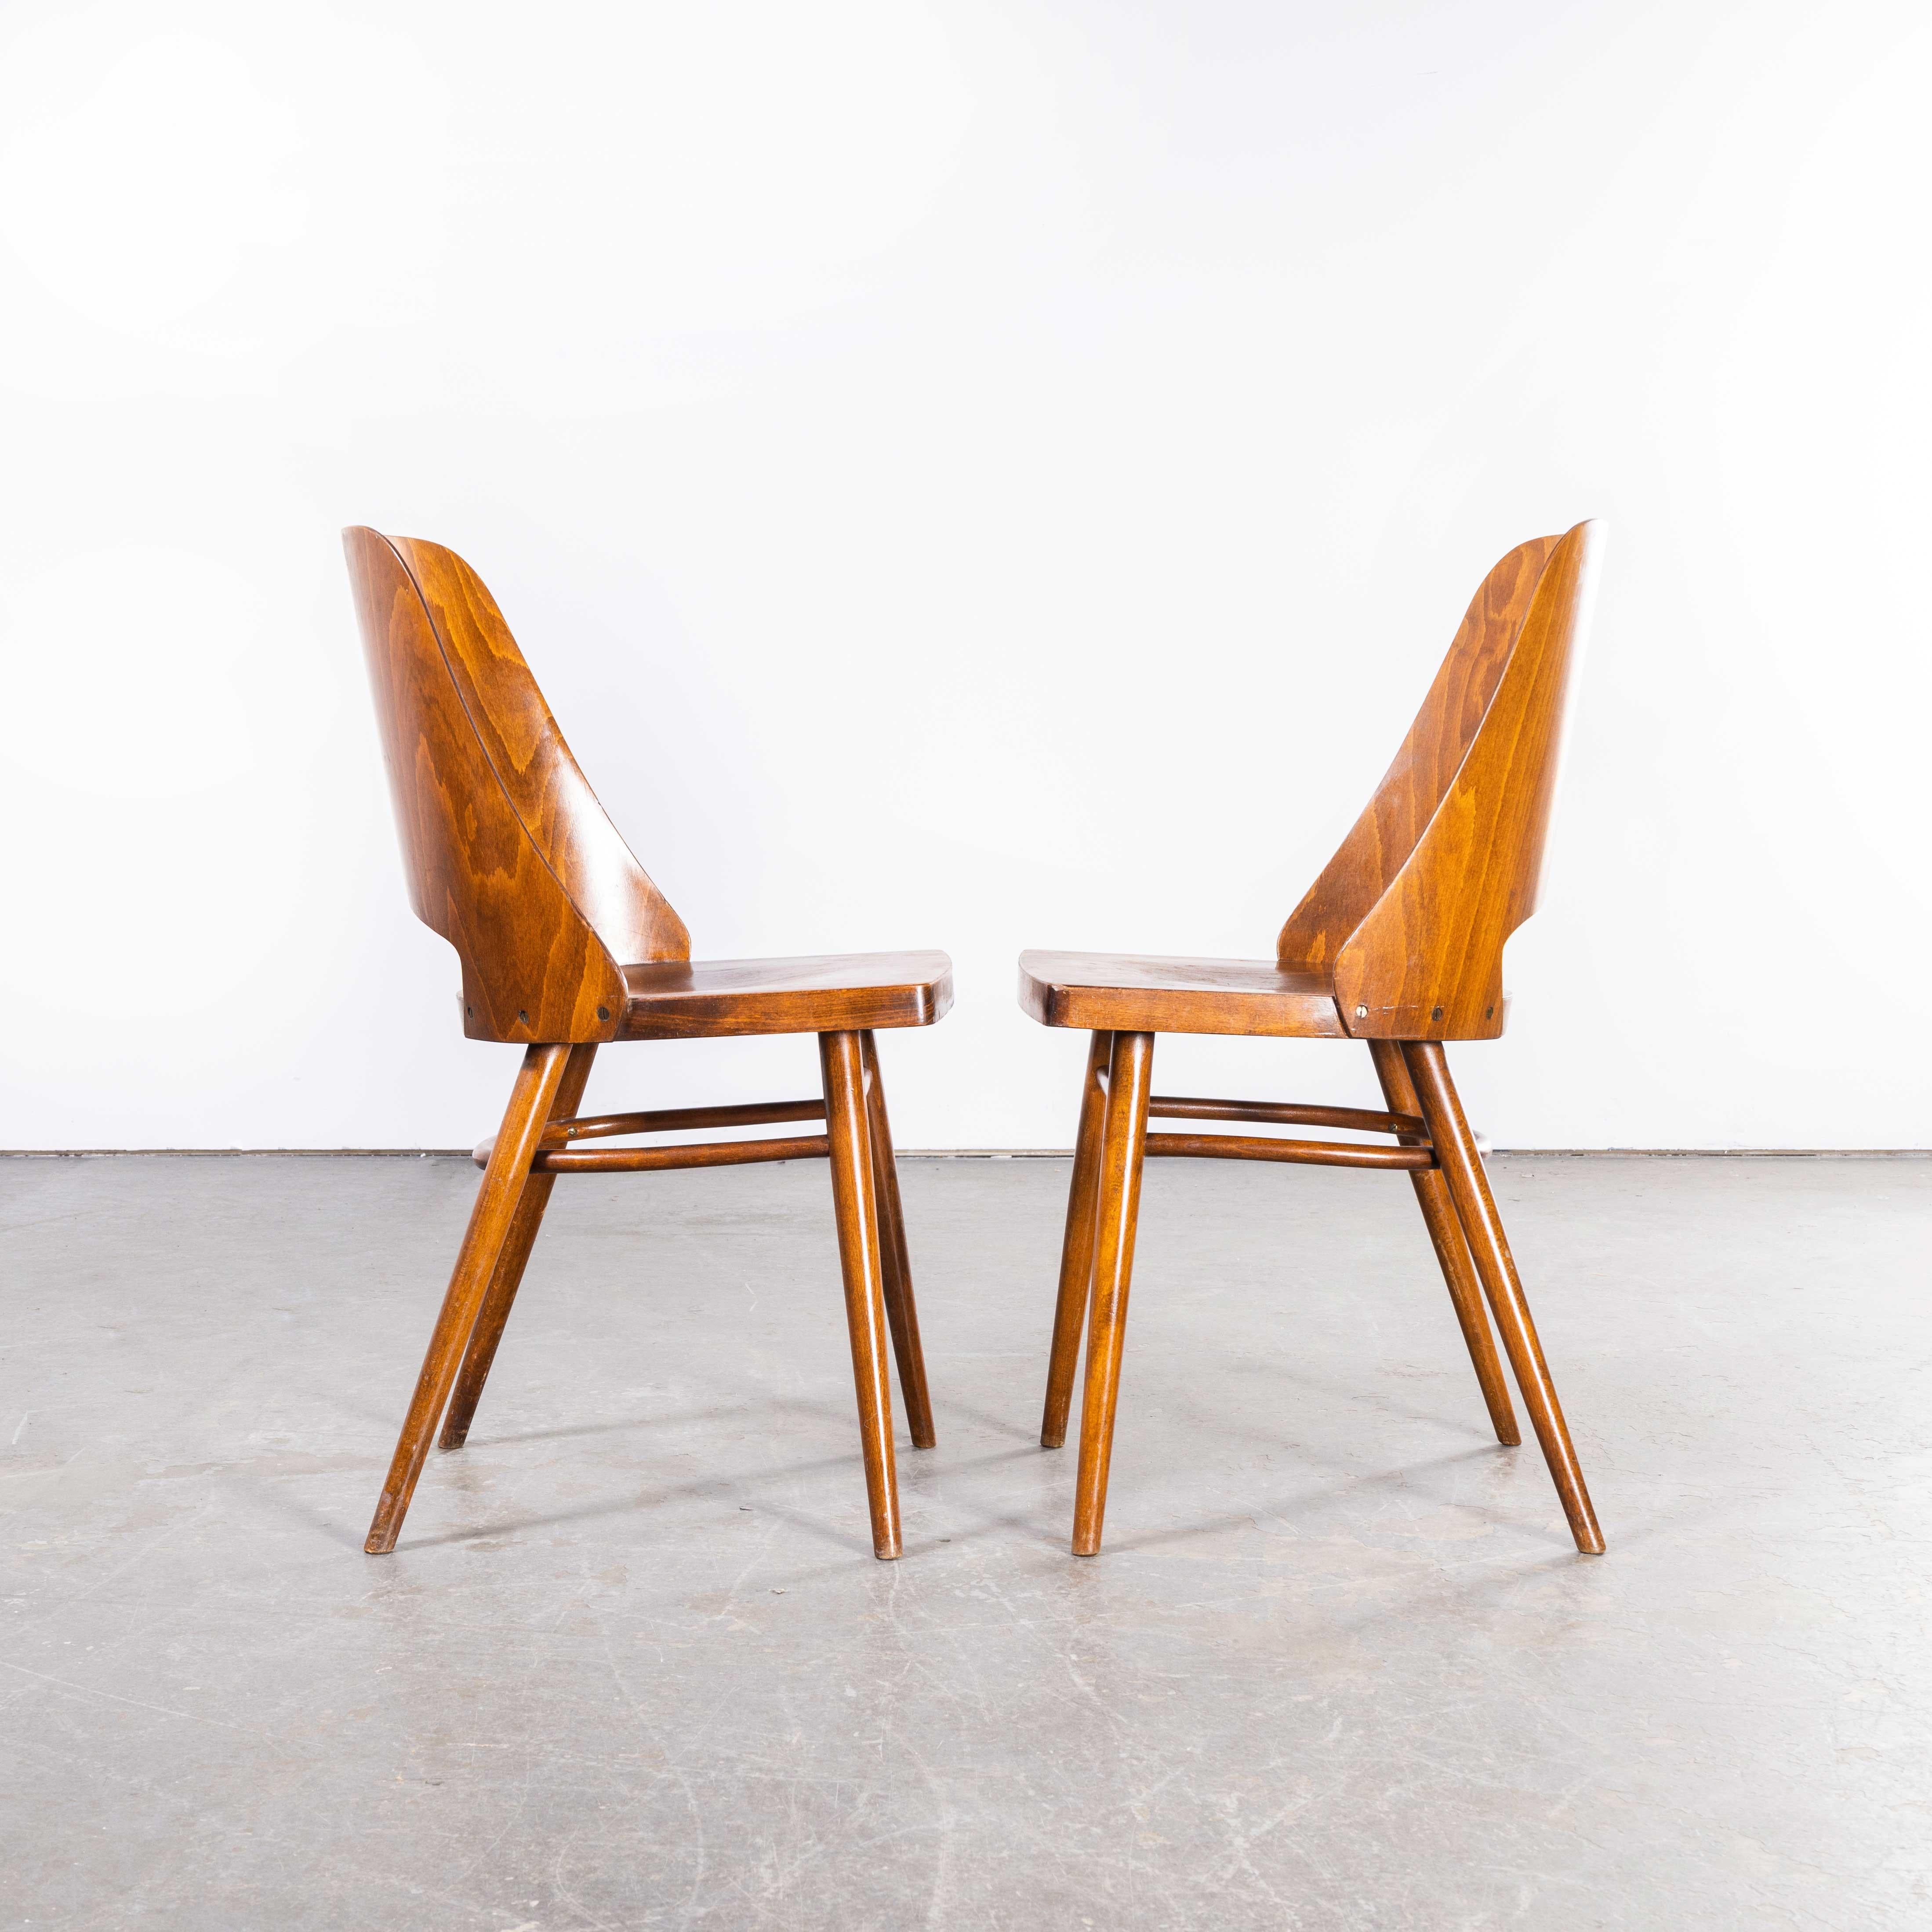 1950's Honey Beech Dining Chairs By Radomir Hoffman - Pair For Sale 2